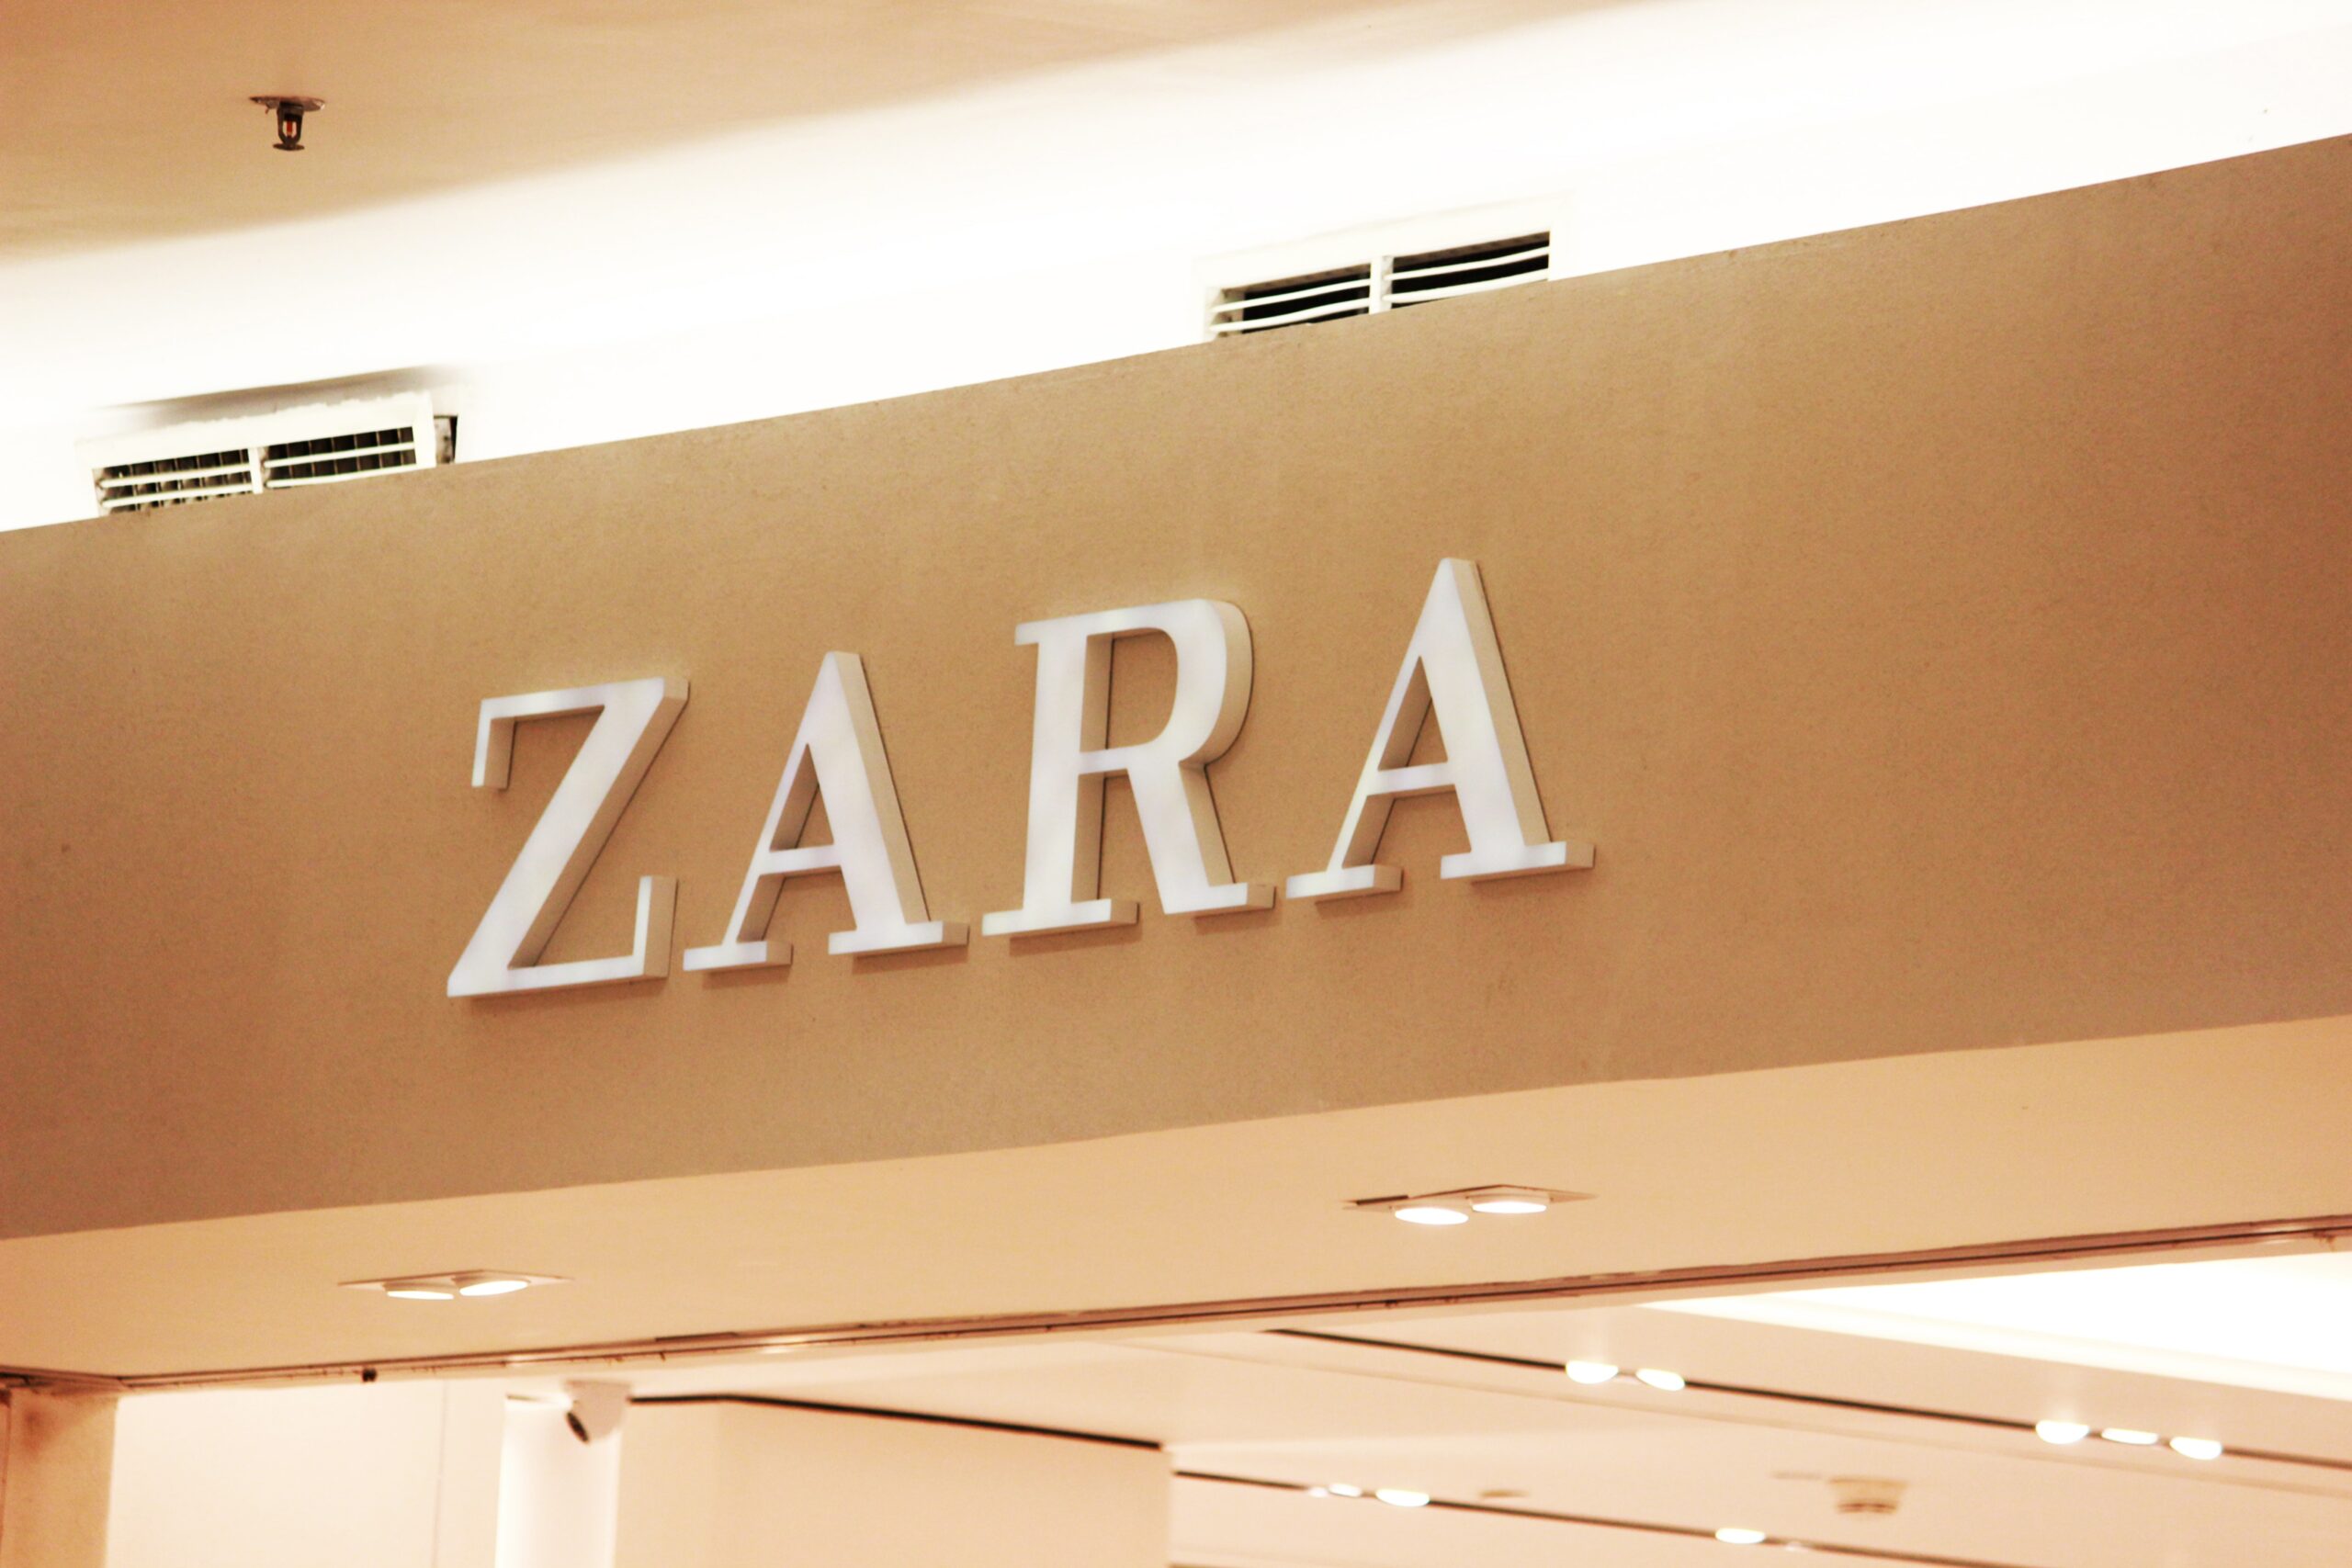 Zara Sizing Guide – How to Find the Perfect Fit